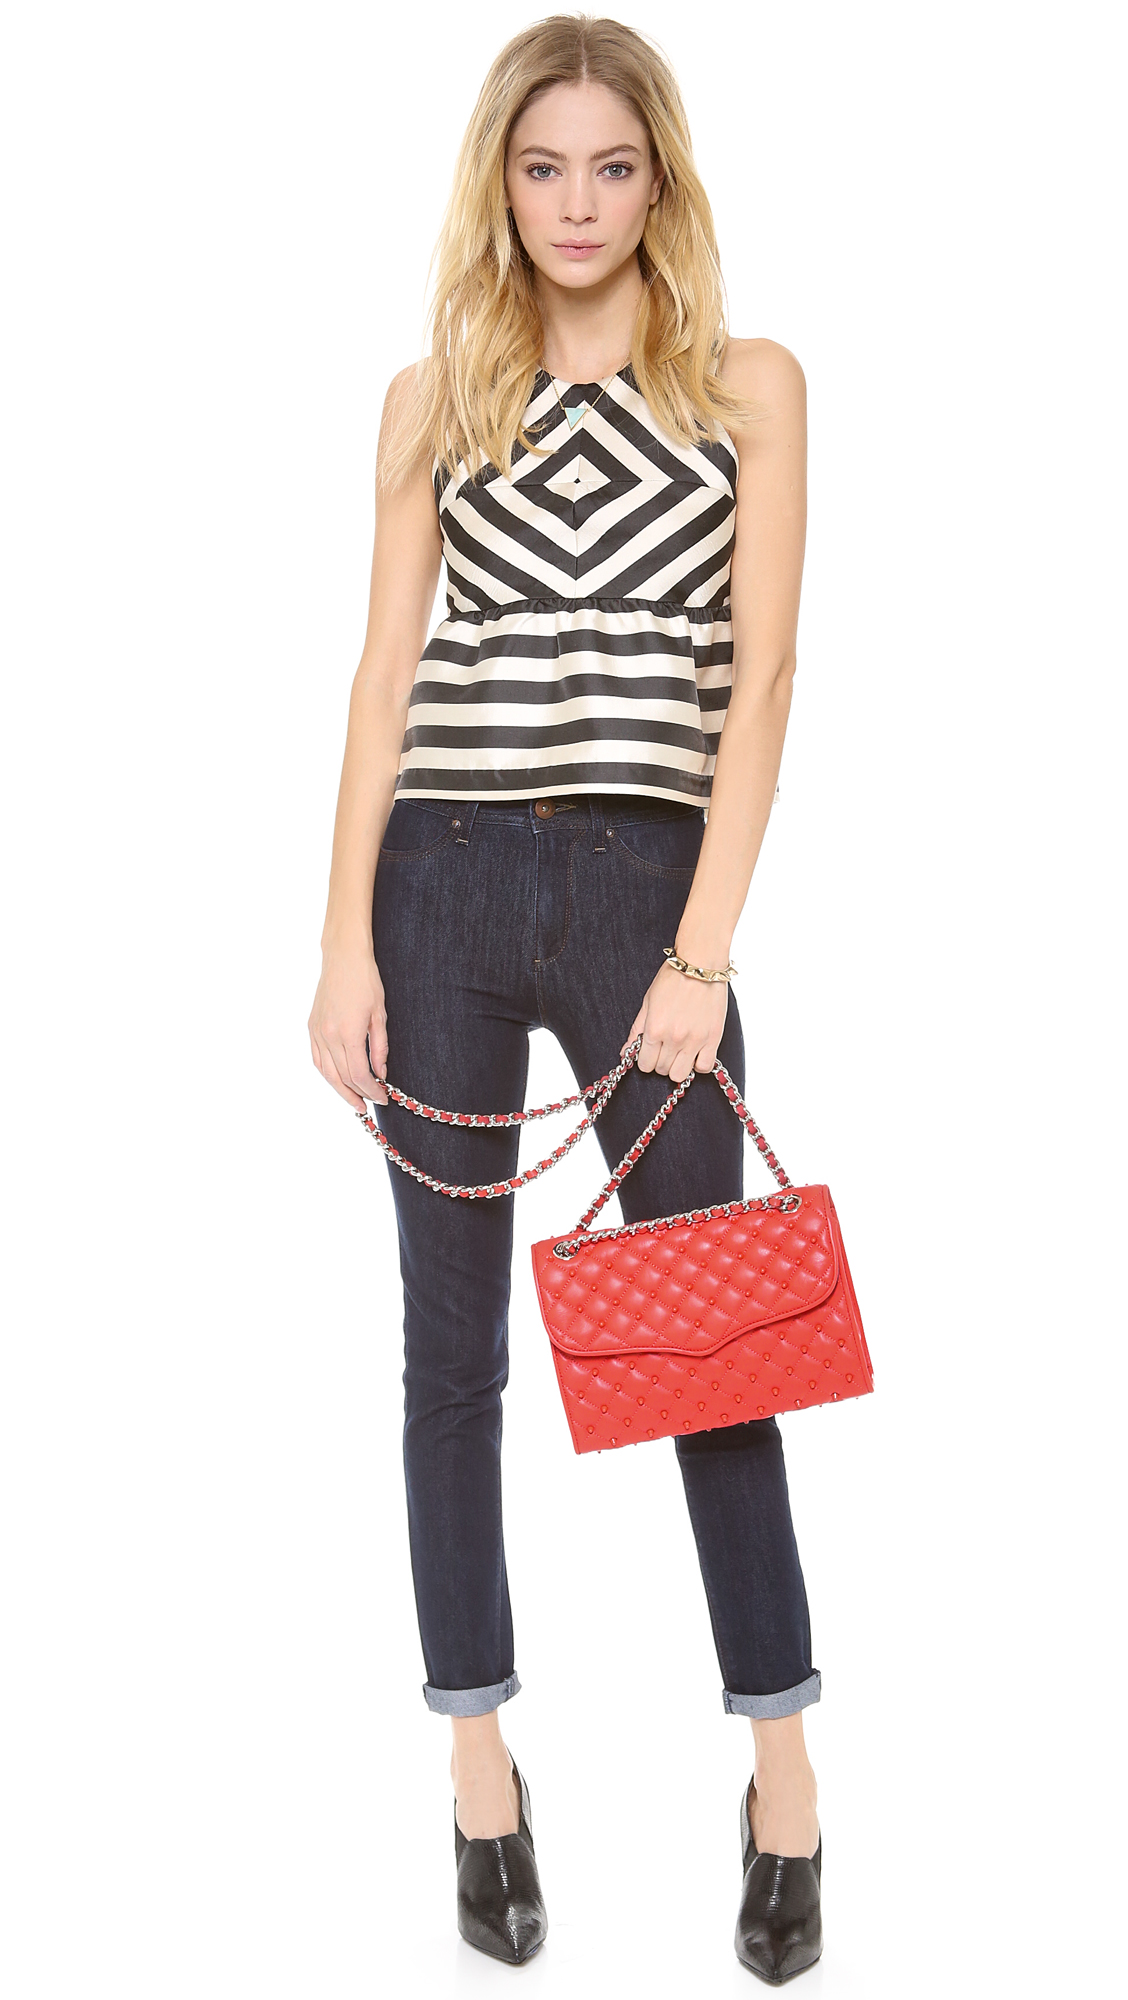 Rebecca Minkoff Leather Studded Quilted Affair Bag in Coral (Orange) - Lyst